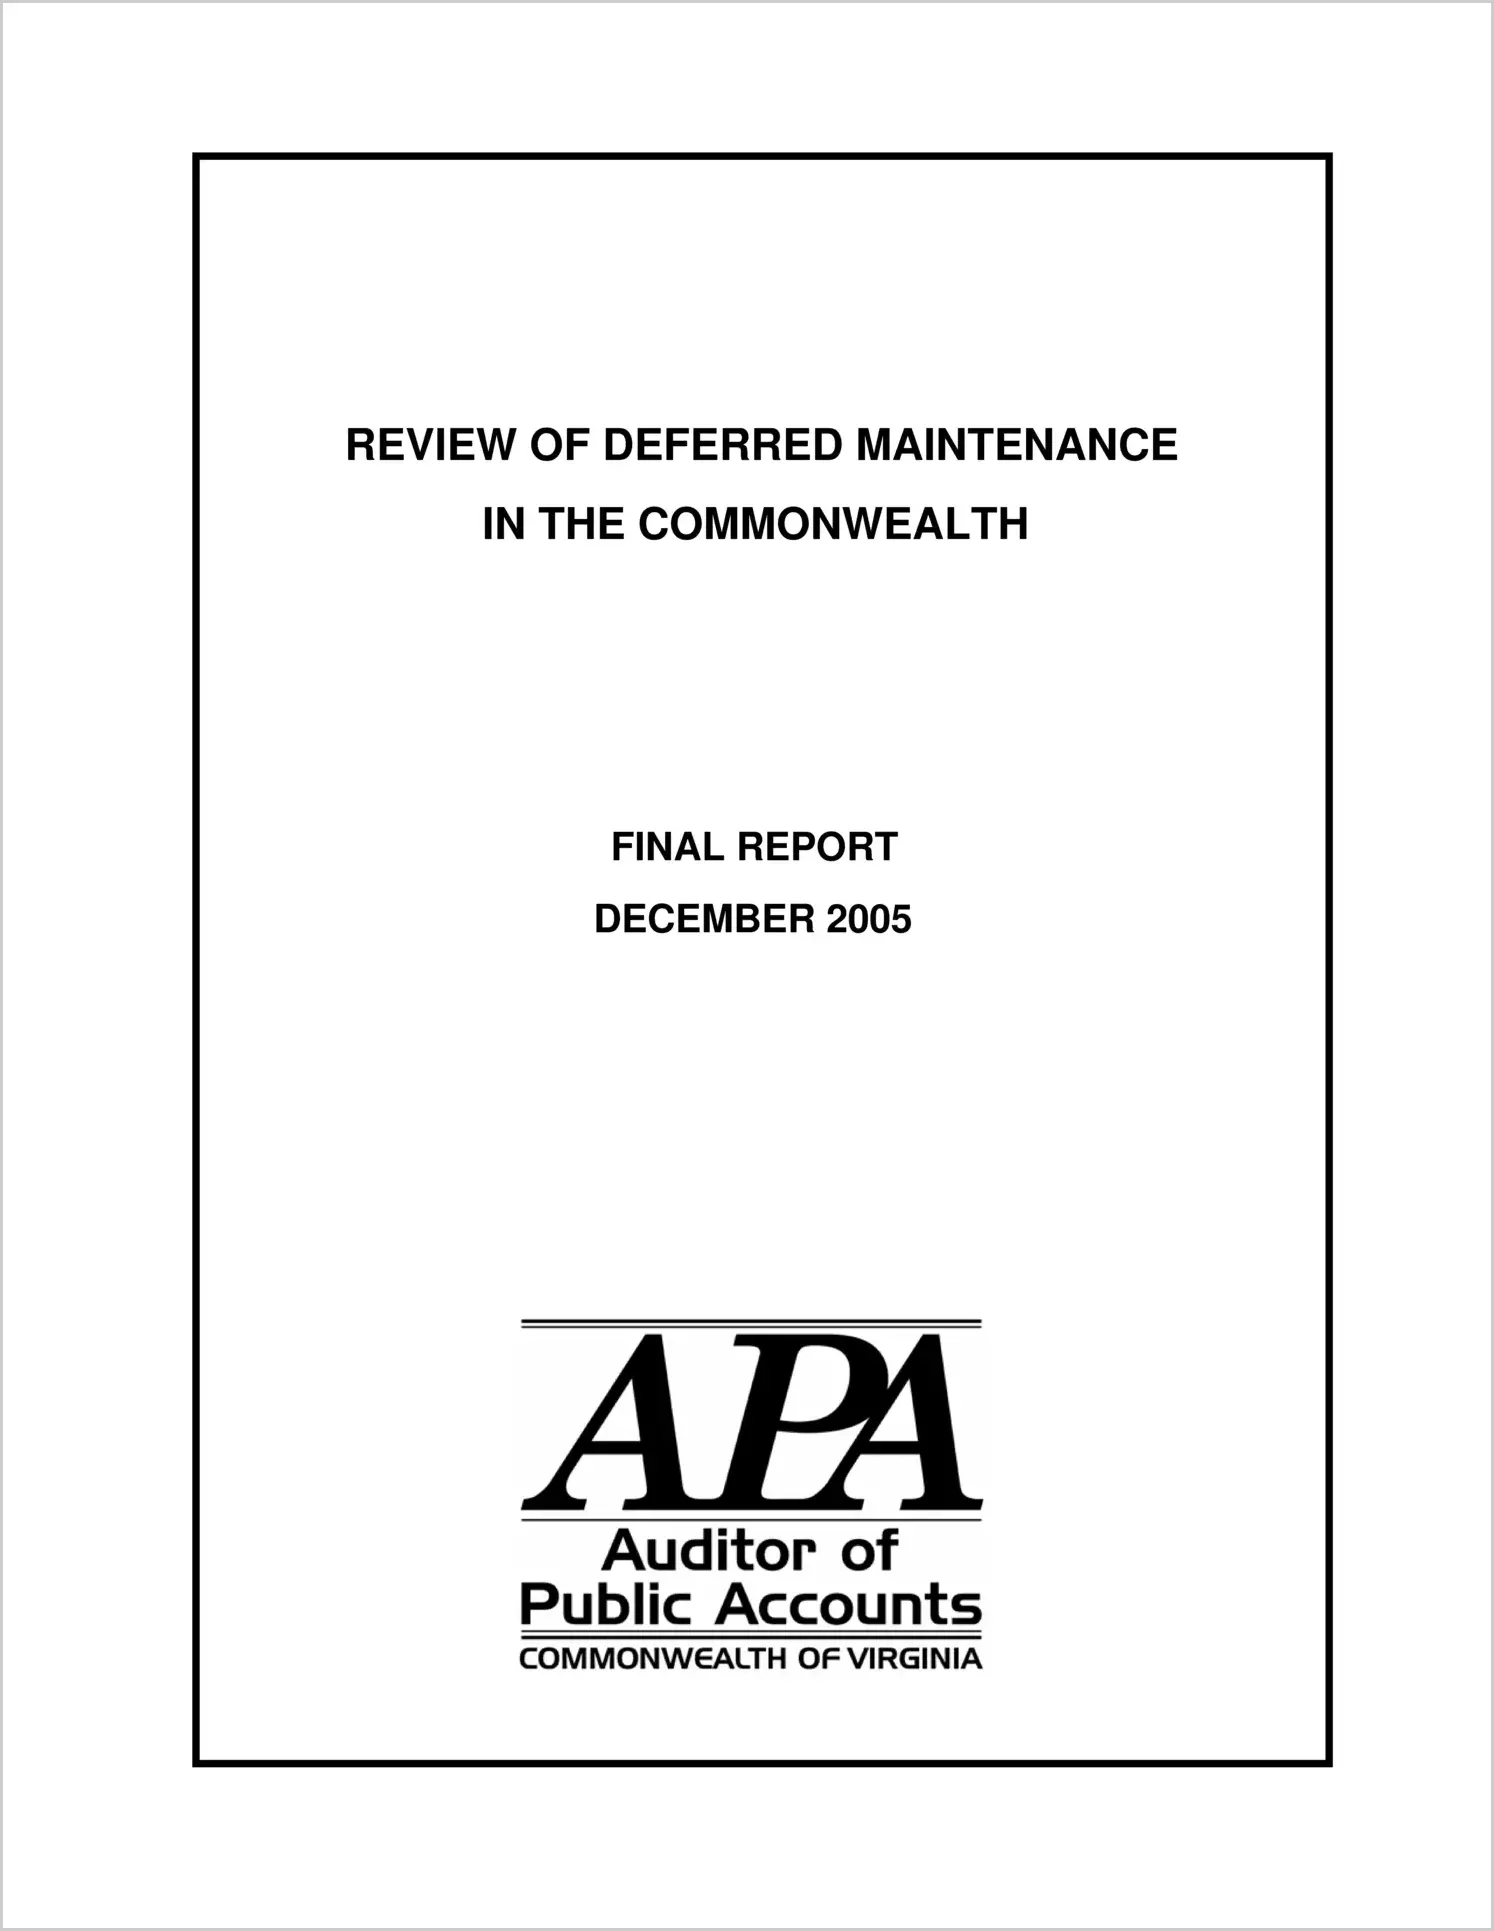 Review of Deferred Maintenance in the Commonwealth Final Report - December 2005